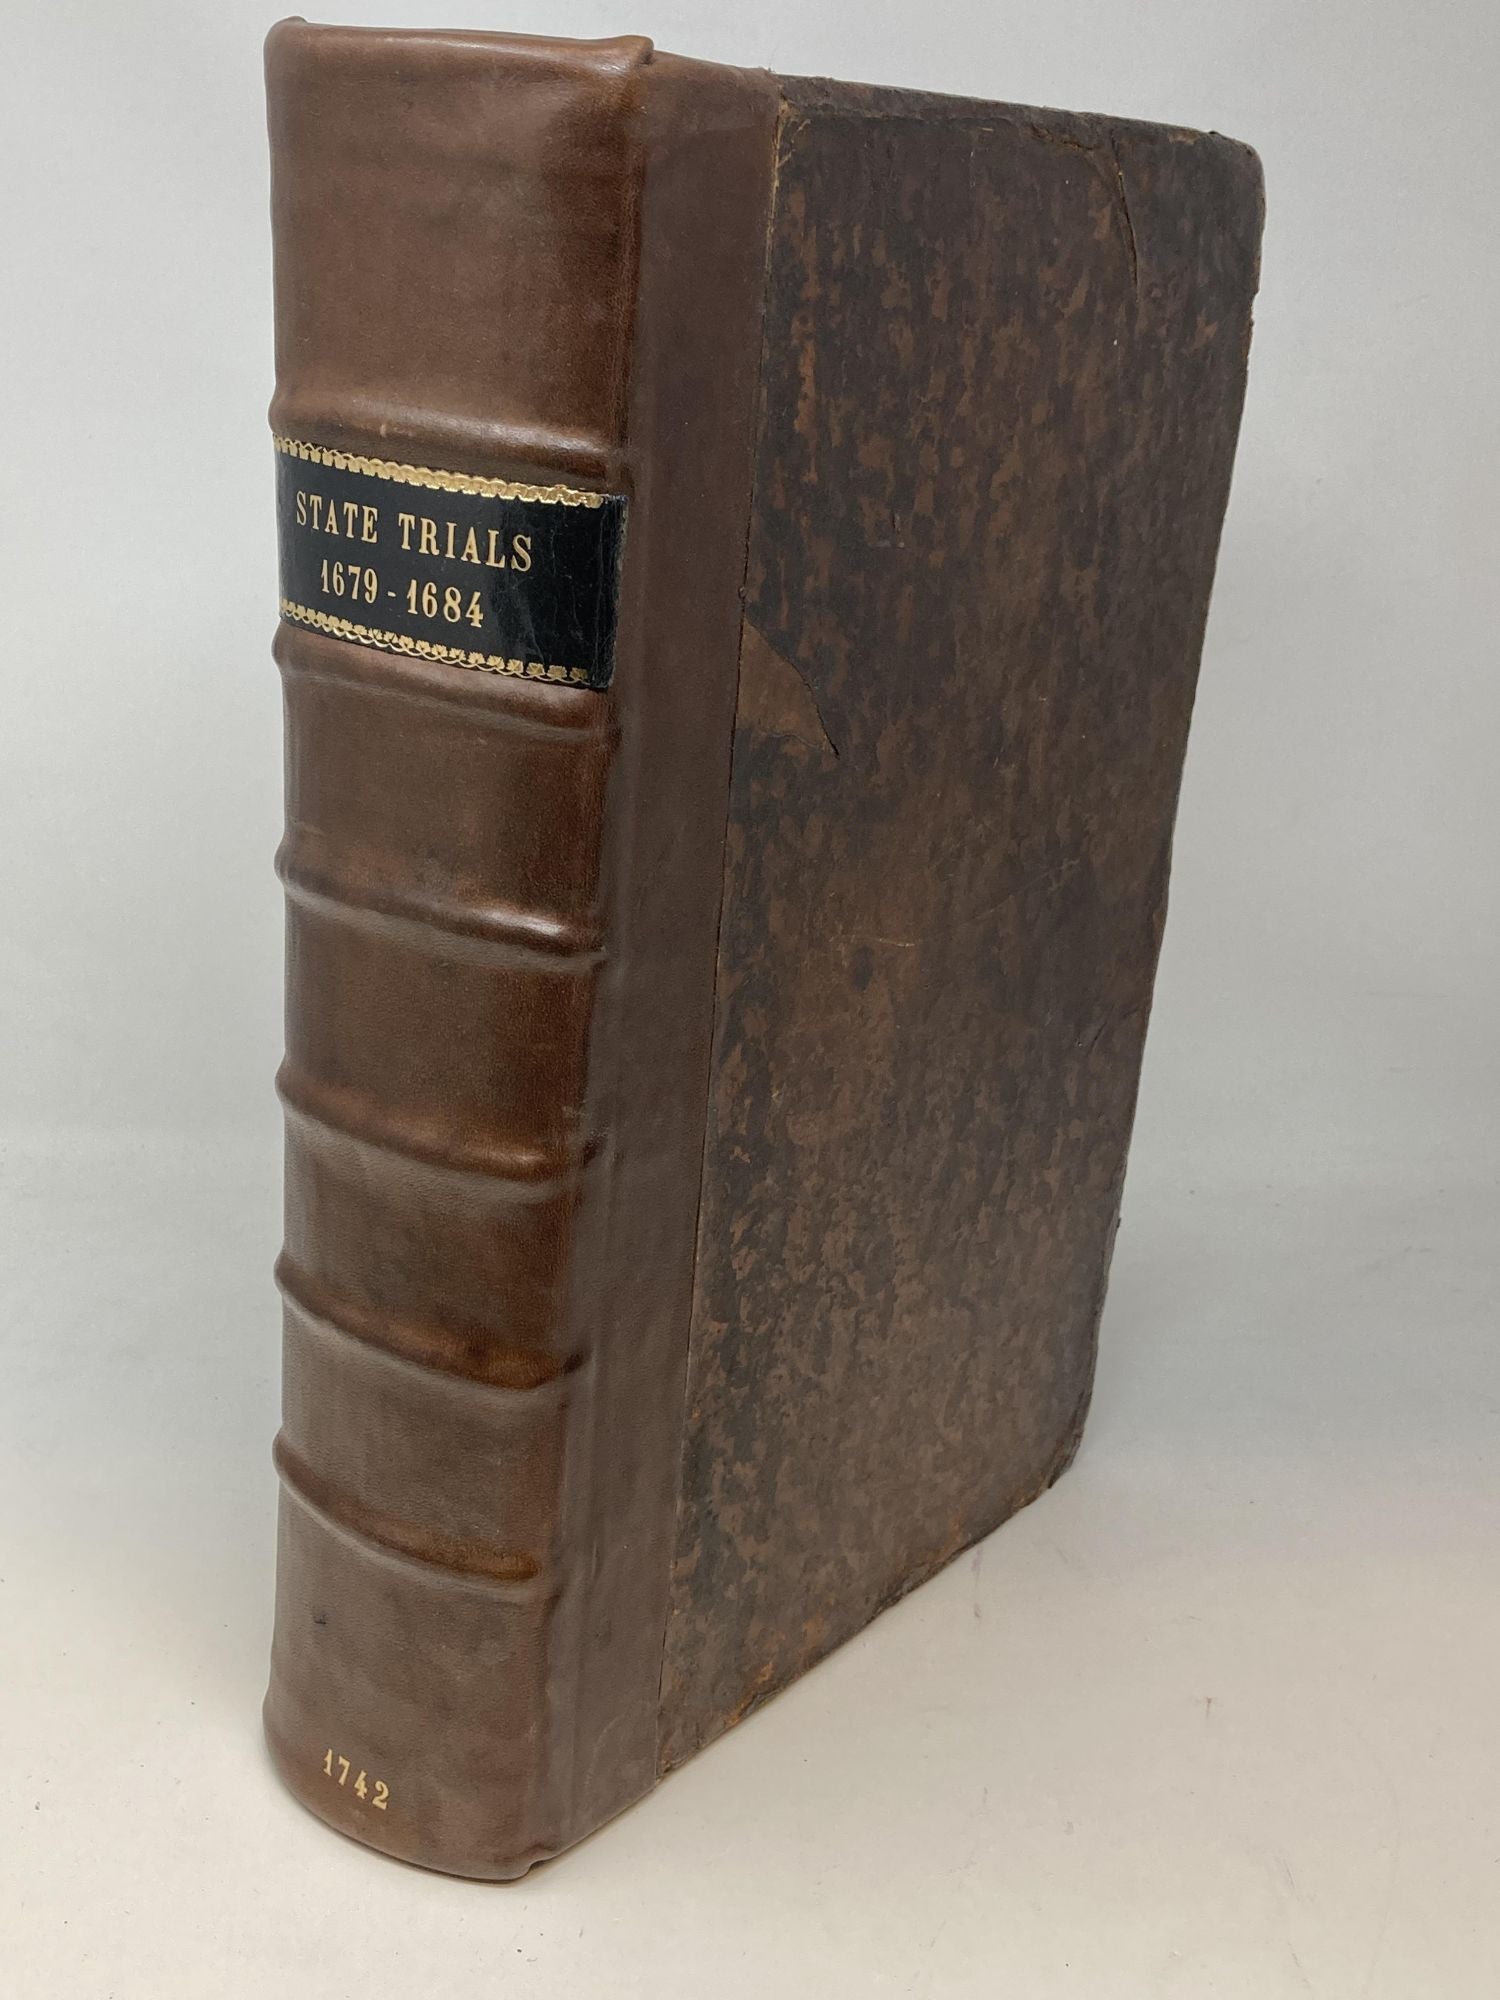 Salmon, Thomas and Sollom Emlyn - A Complete Collection of State-Trials and Proceedings Upon High-Treason, and Other Crimes and Misdemeanours; from the Reign of King Richard II. To the End of the Reign of King George I: The Third Volume (1679-1684); (with Two Alphabetical Tables to the Whole)